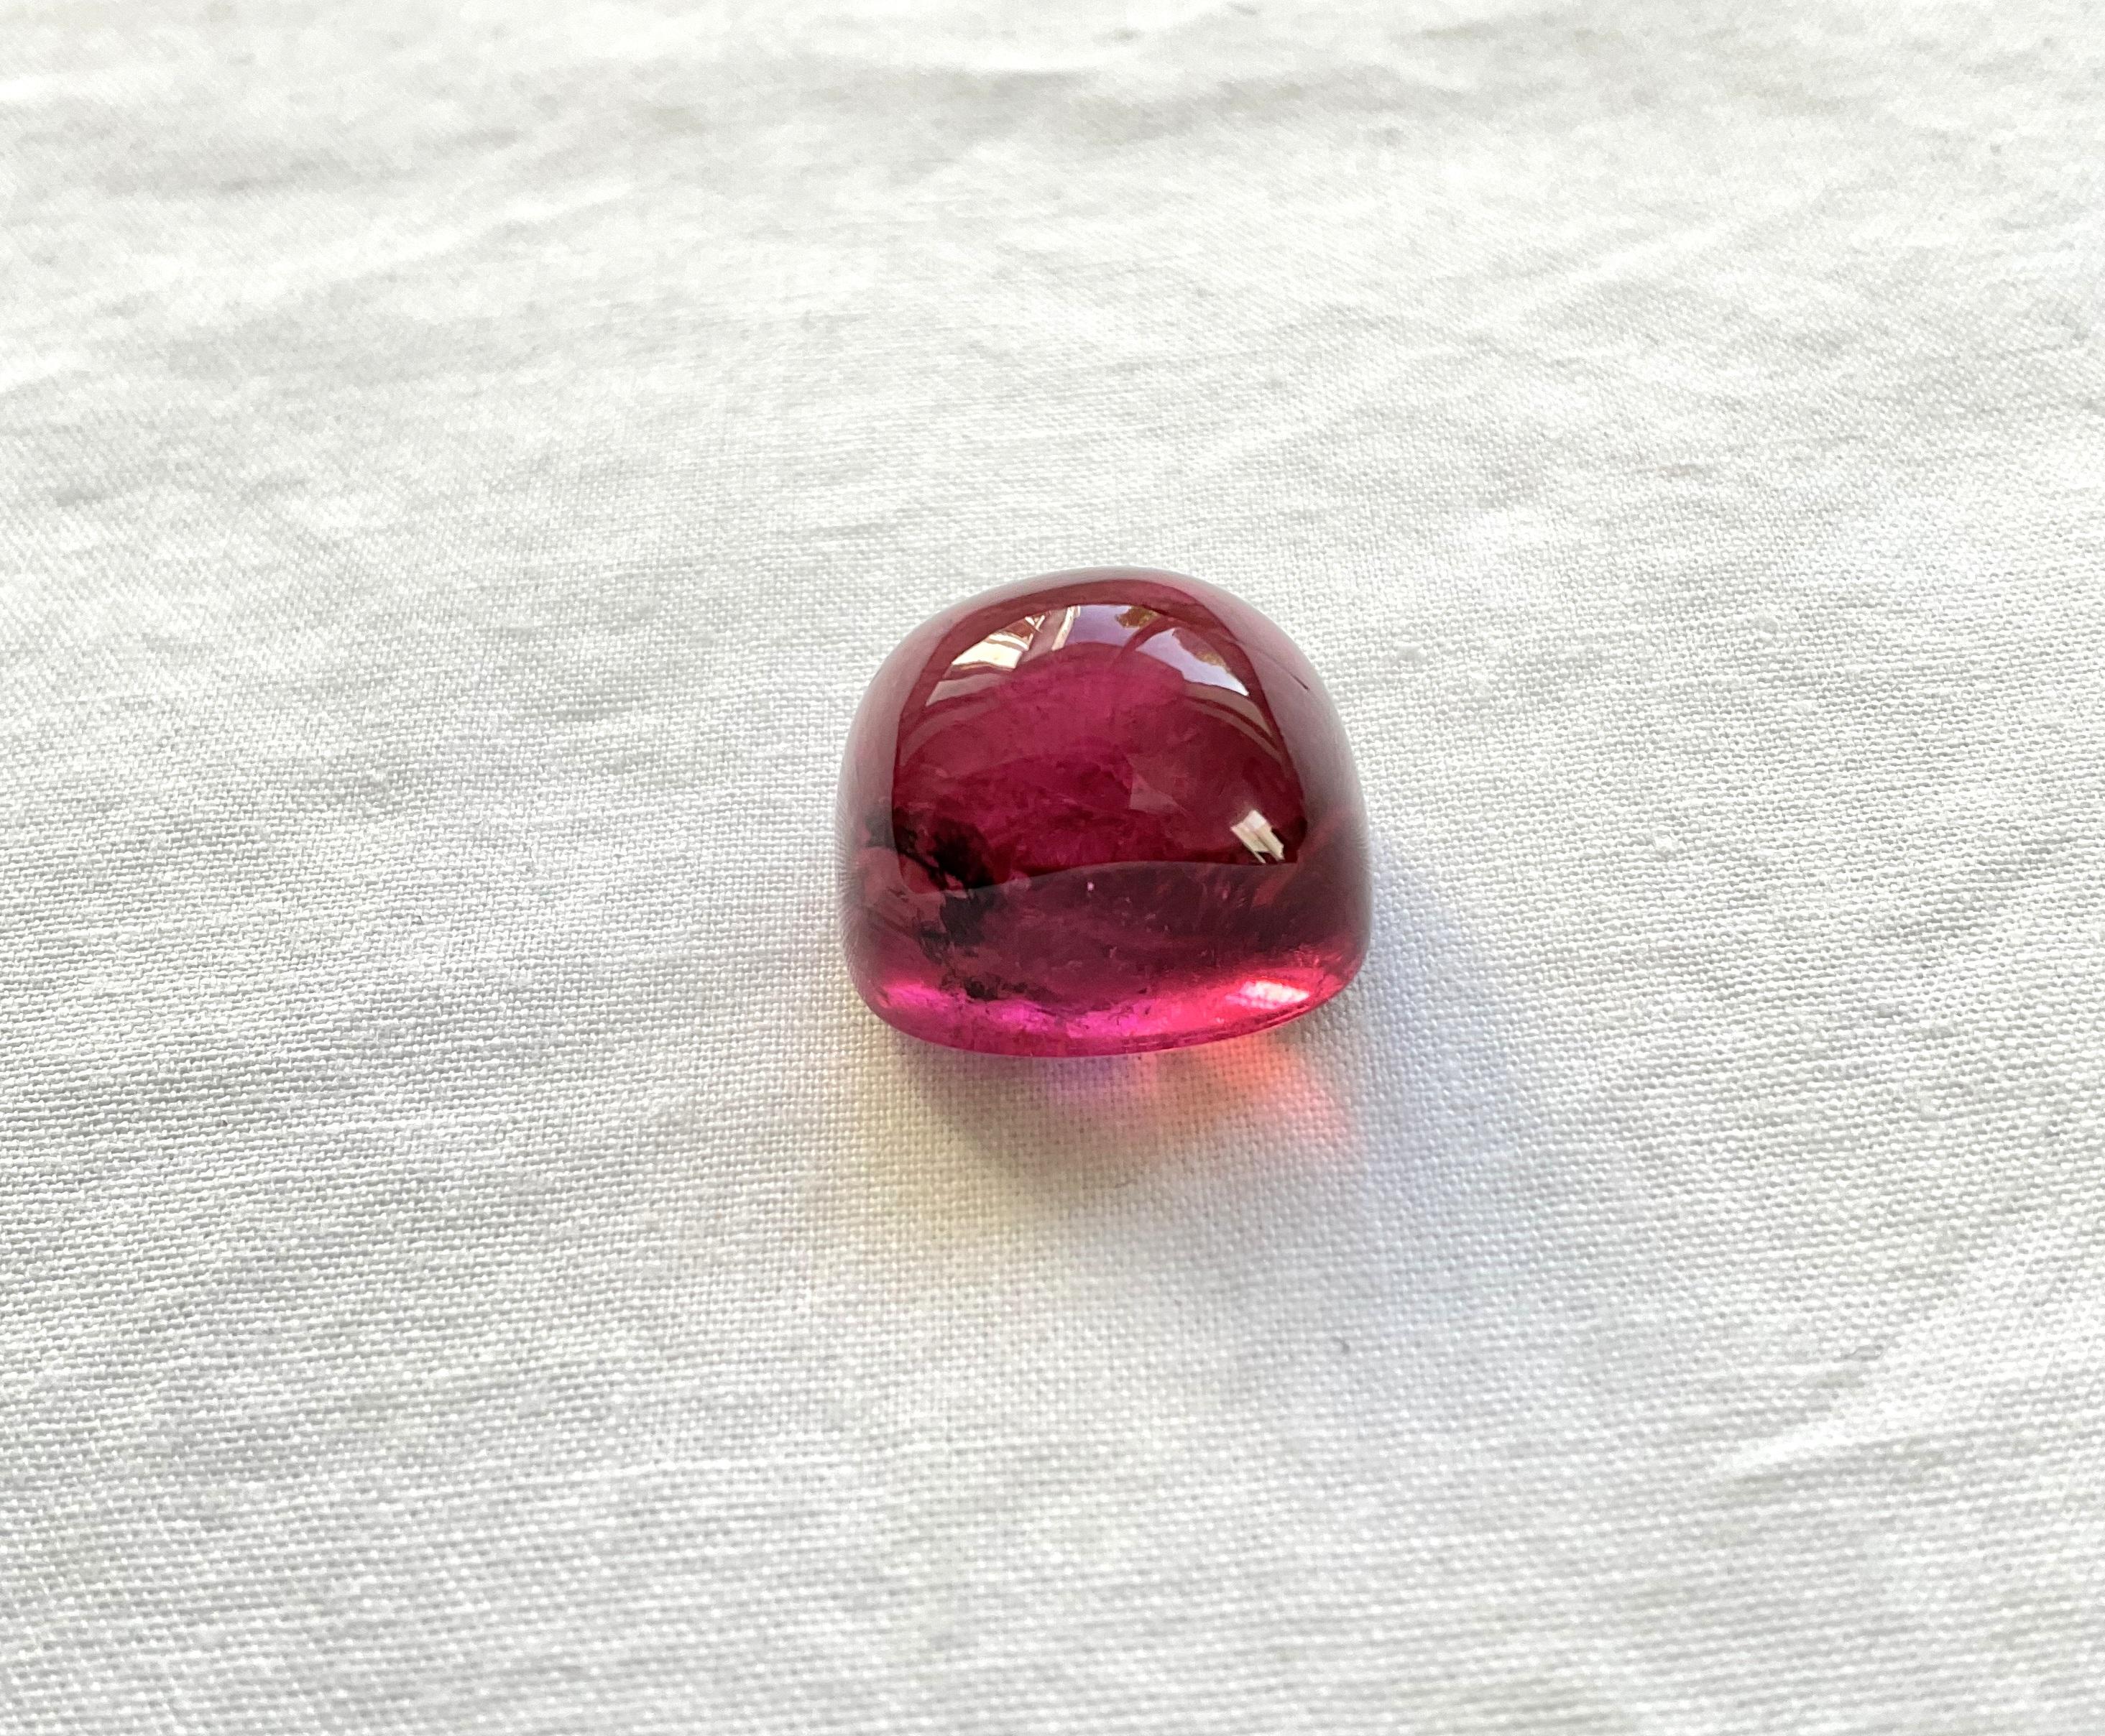 This is a one of a kind of rubellite tourmaline.
Gemstone - Rubellite Tourmaline
Weight -  23.97 Ct
Size - 15.4x13.14 MM
Piece - 1

